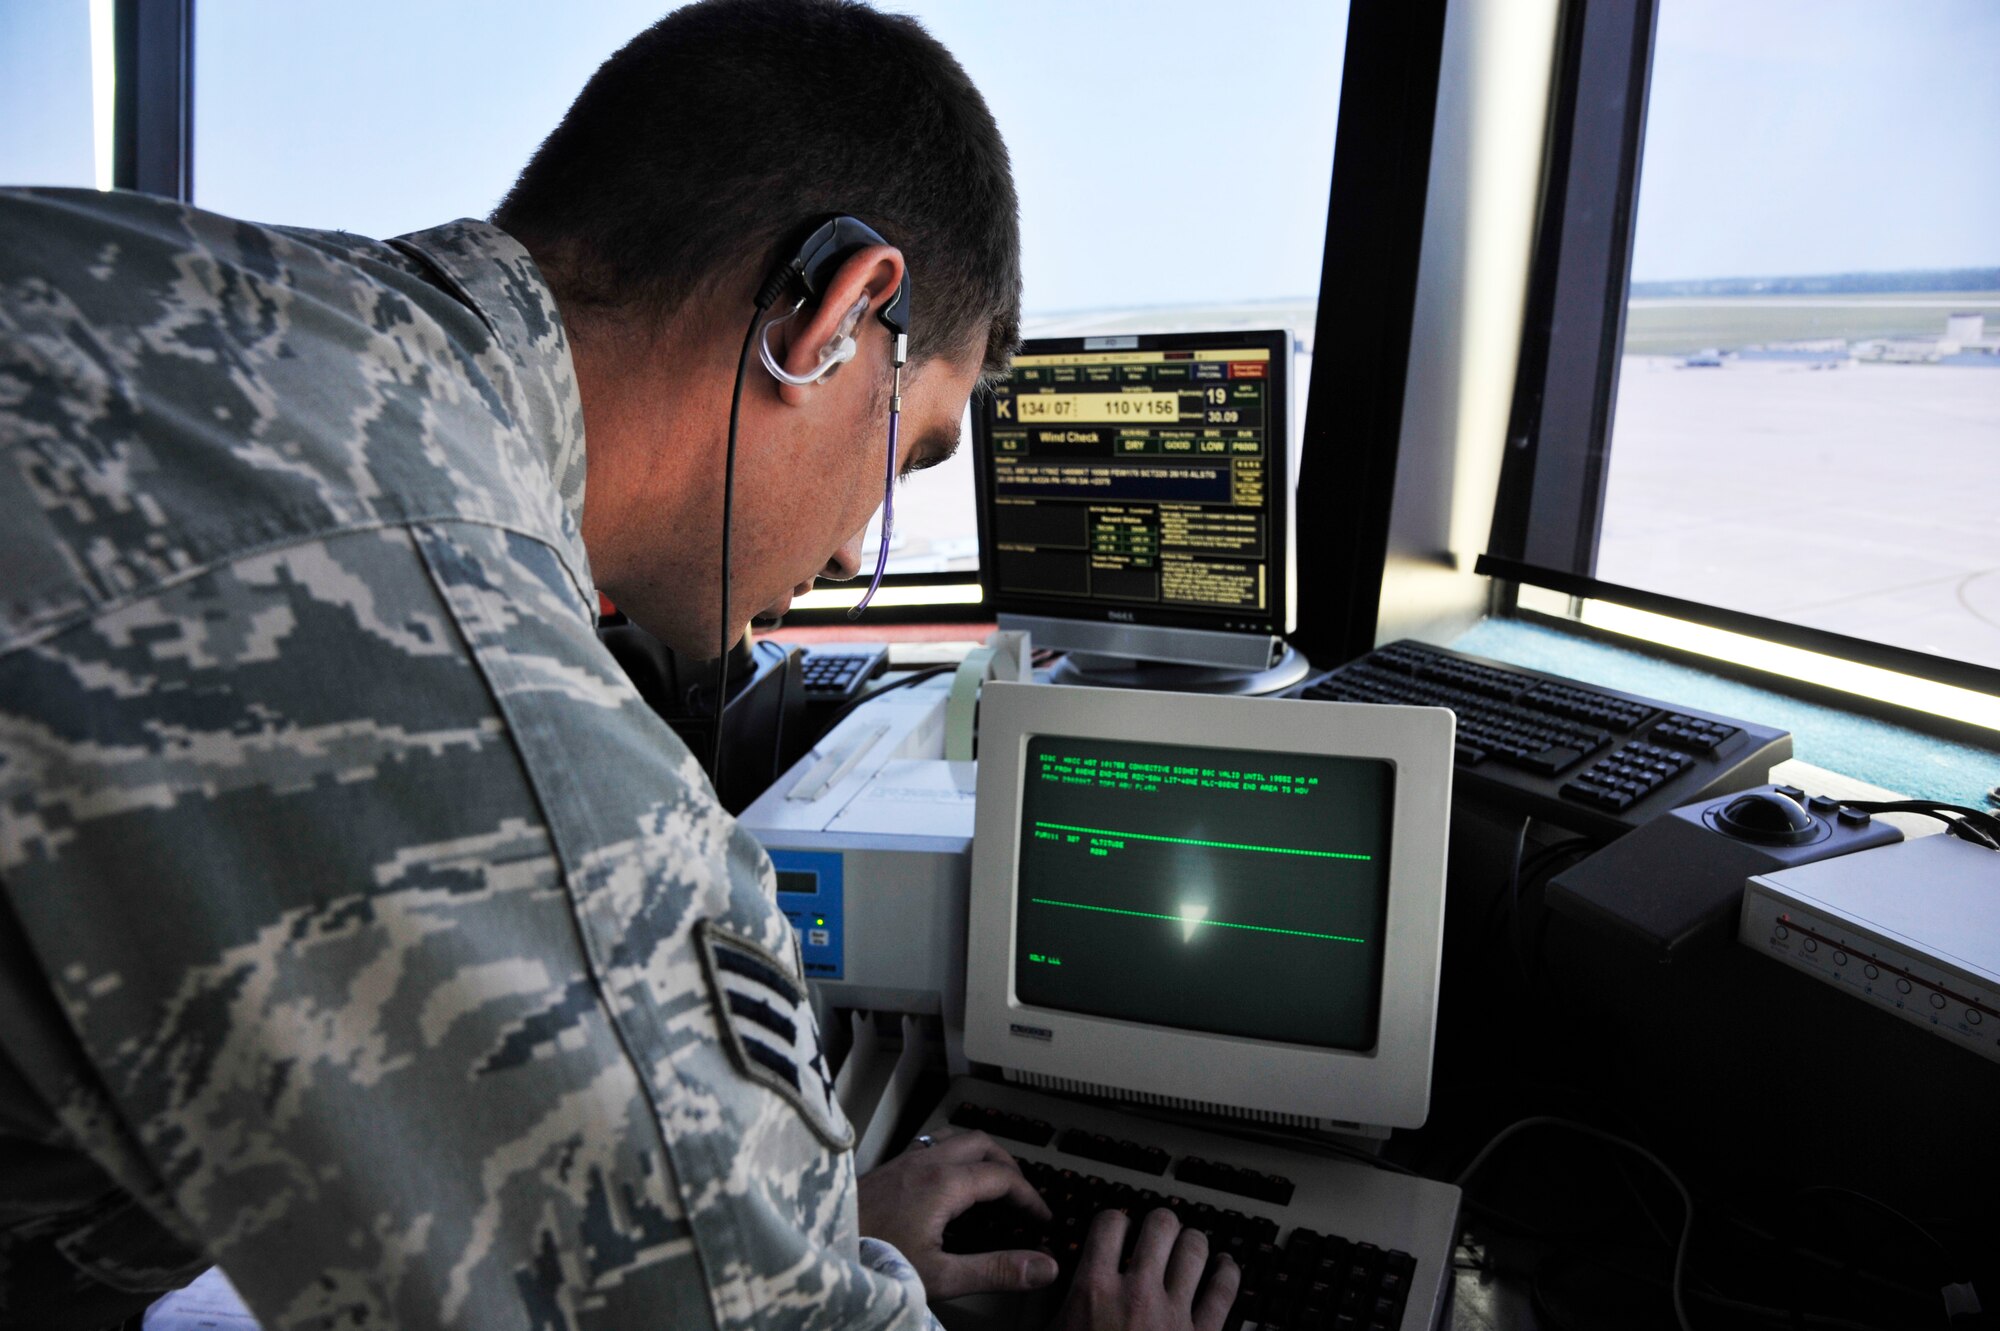 U.S. Air Force Senior Airman Craig Gephardt, 509th Operations Support Squadron air traffic controller, operates the flight data systems in the tower at Whiteman Air Force Base, Mo., July 10, 2014. The flight data systems contain flight plans for every aircraft operating within the Kansas City Center airspace. (U.S. Air Force photo by Airman 1st Class Keenan Berry/Released)